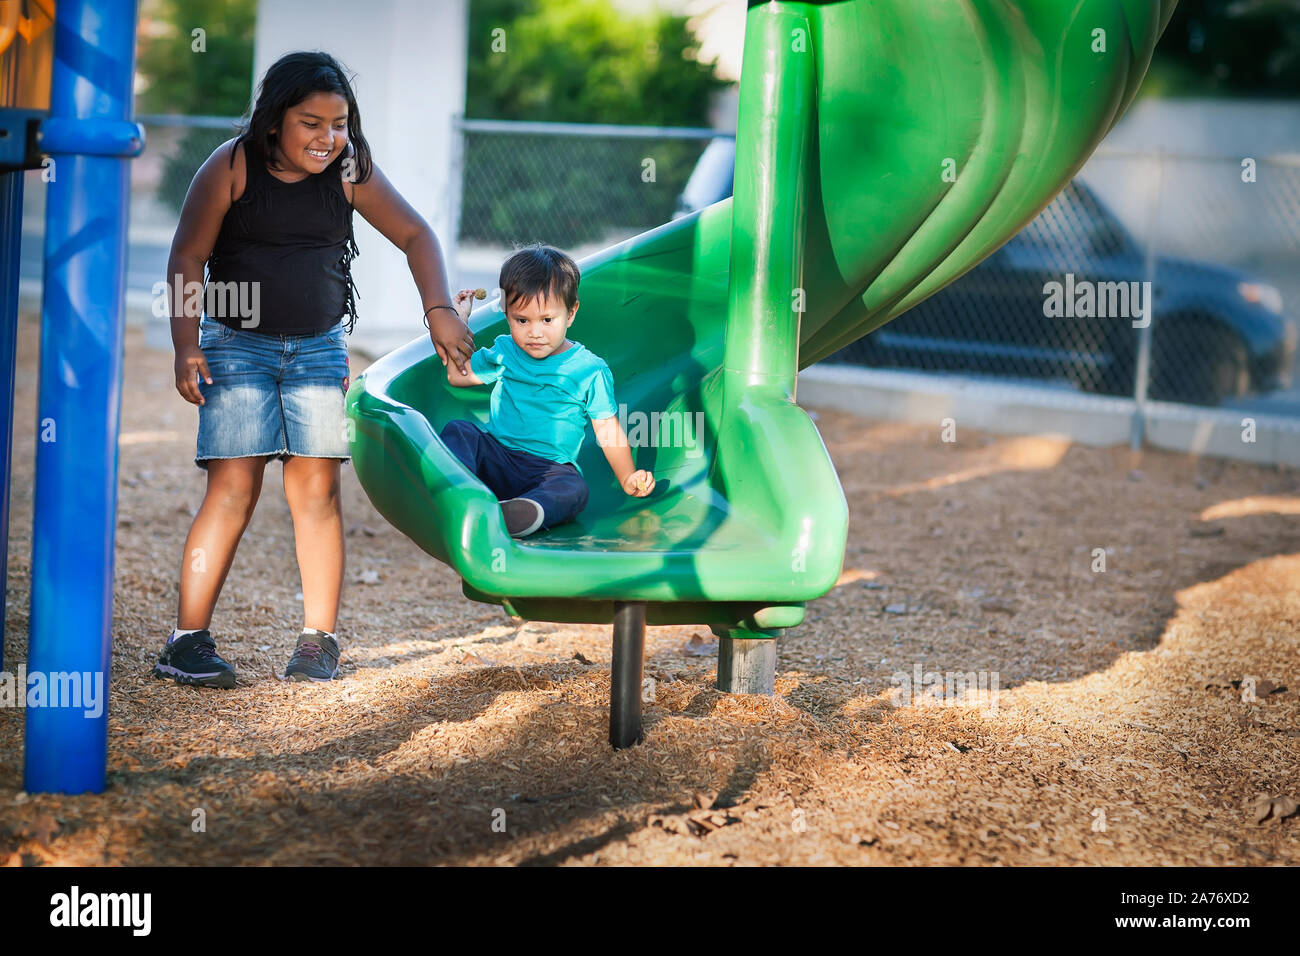 A big sister is holding her young brothers hand while he gets off from a playground slide. Stock Photo